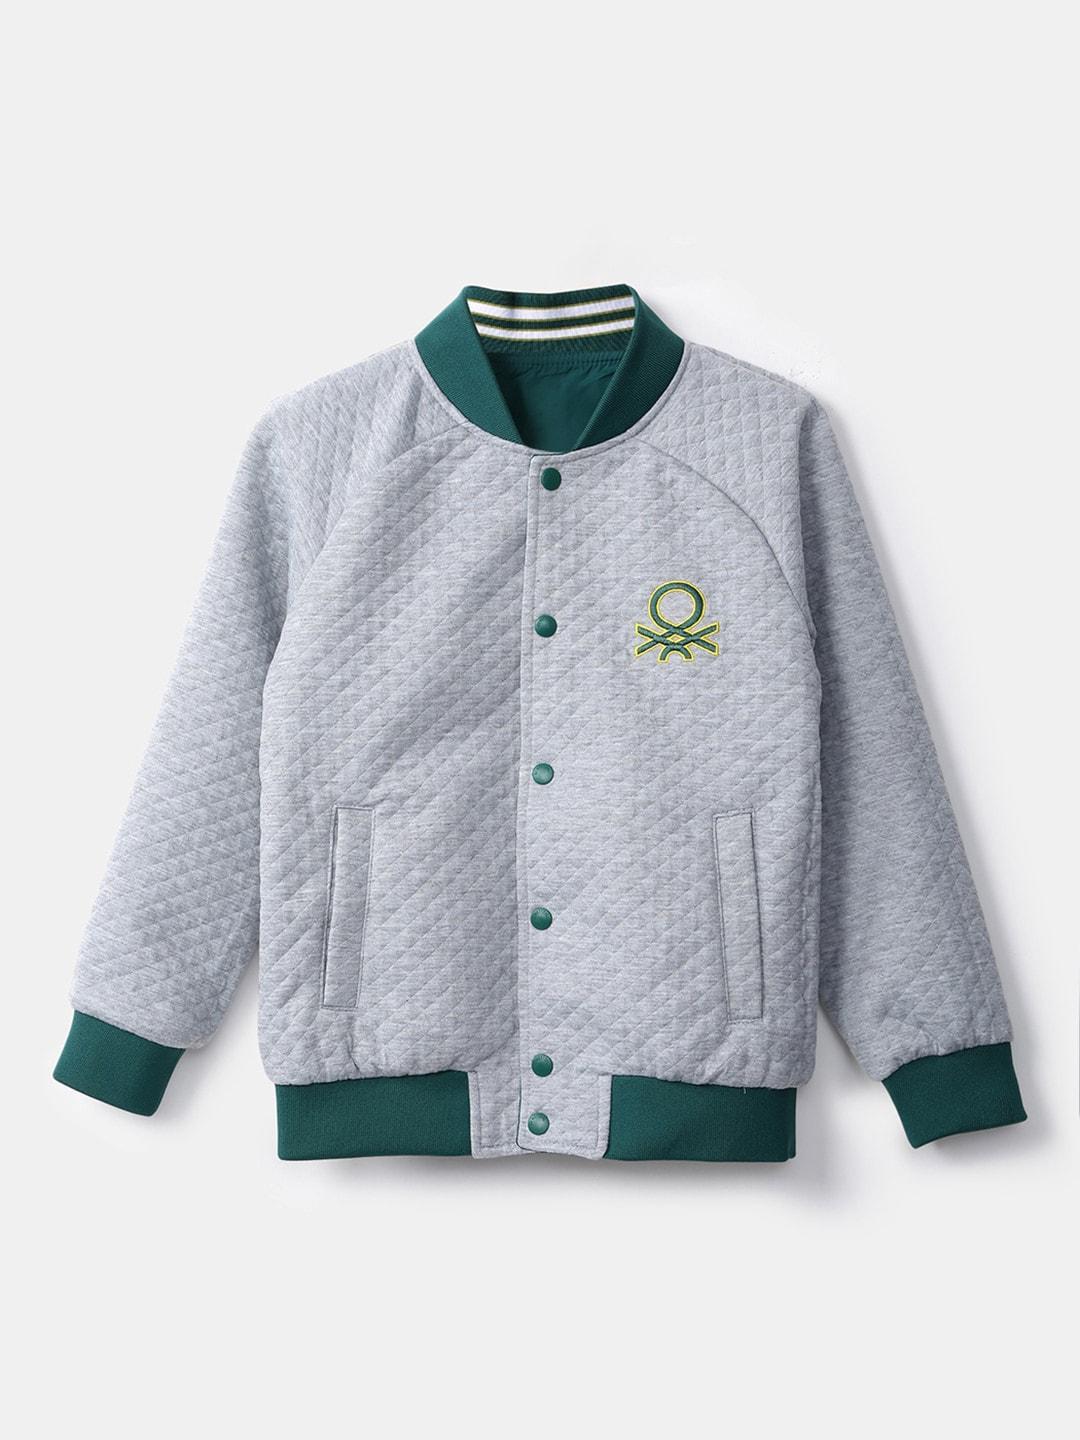 United Colors of Benetton Boys Teal Grey Bomber Jacket